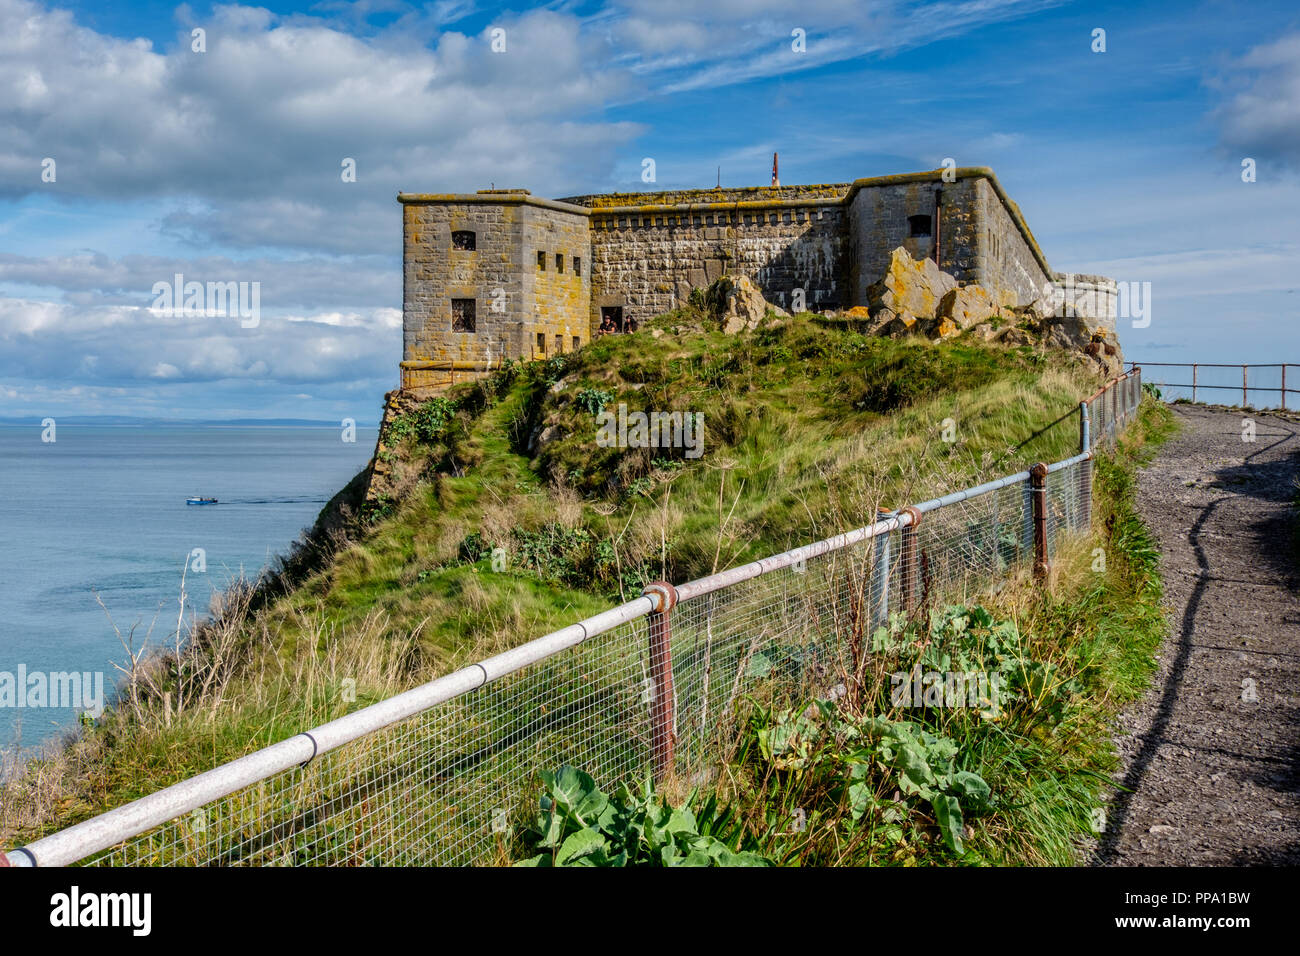 St Catherine's Fort, Tenby, Pembrokeshire, Wales Stockfoto